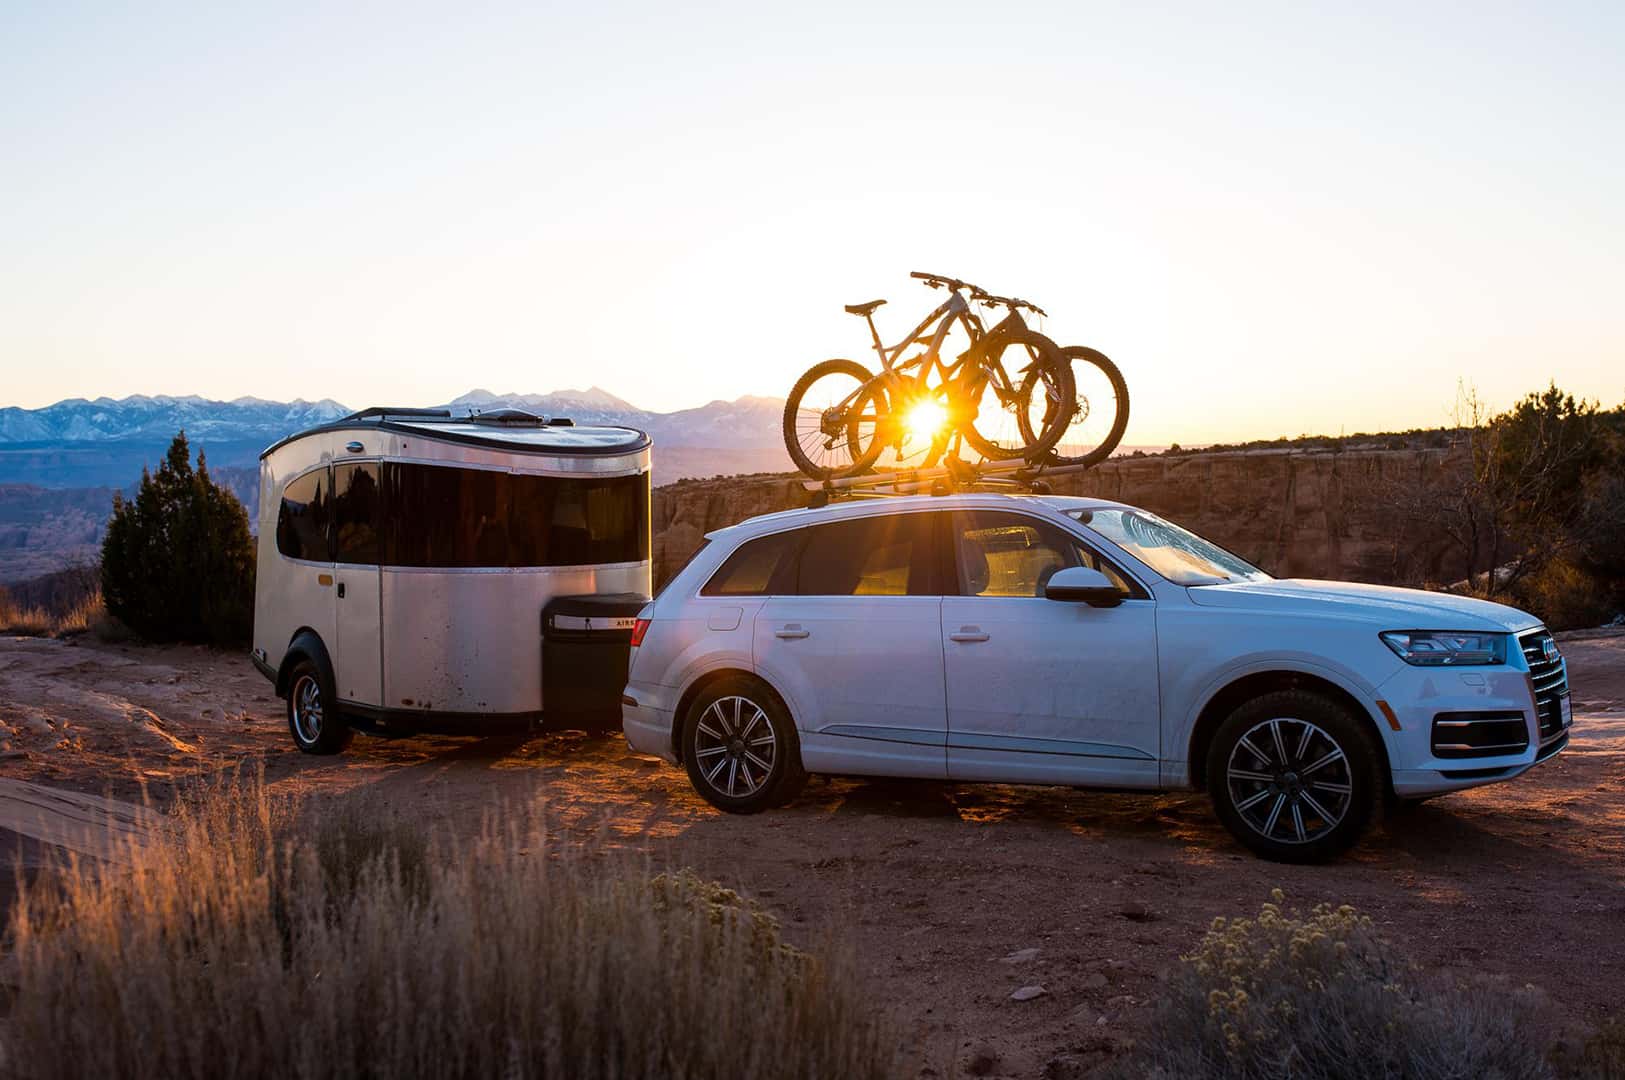 The 7 Best SUVs For Towing A Travel Trailer To Buy In 2022